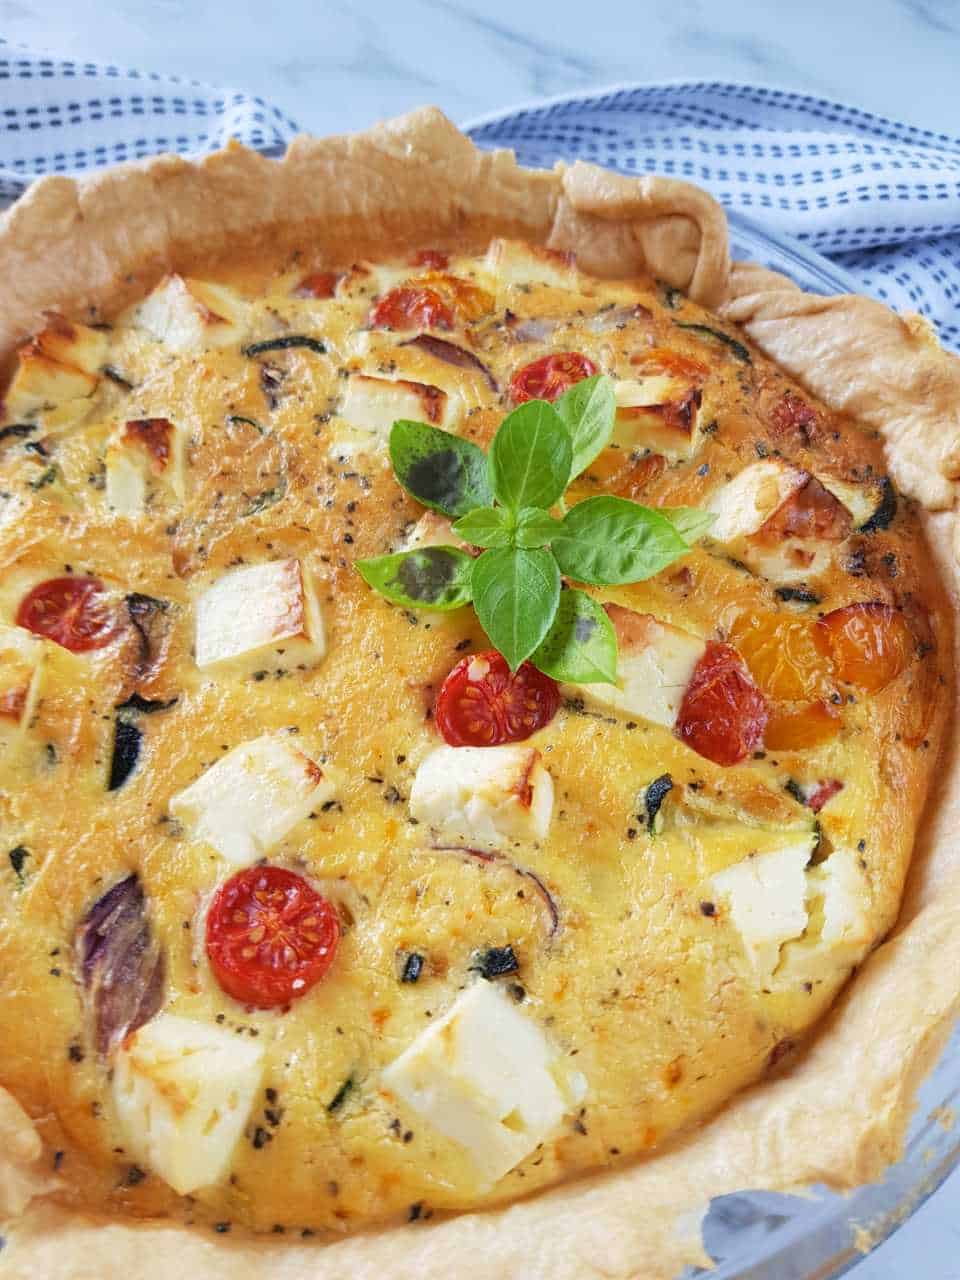 A quiche with cubes of feta and halves of cherry tomatoes. A sprig of basil is garnishing the top.